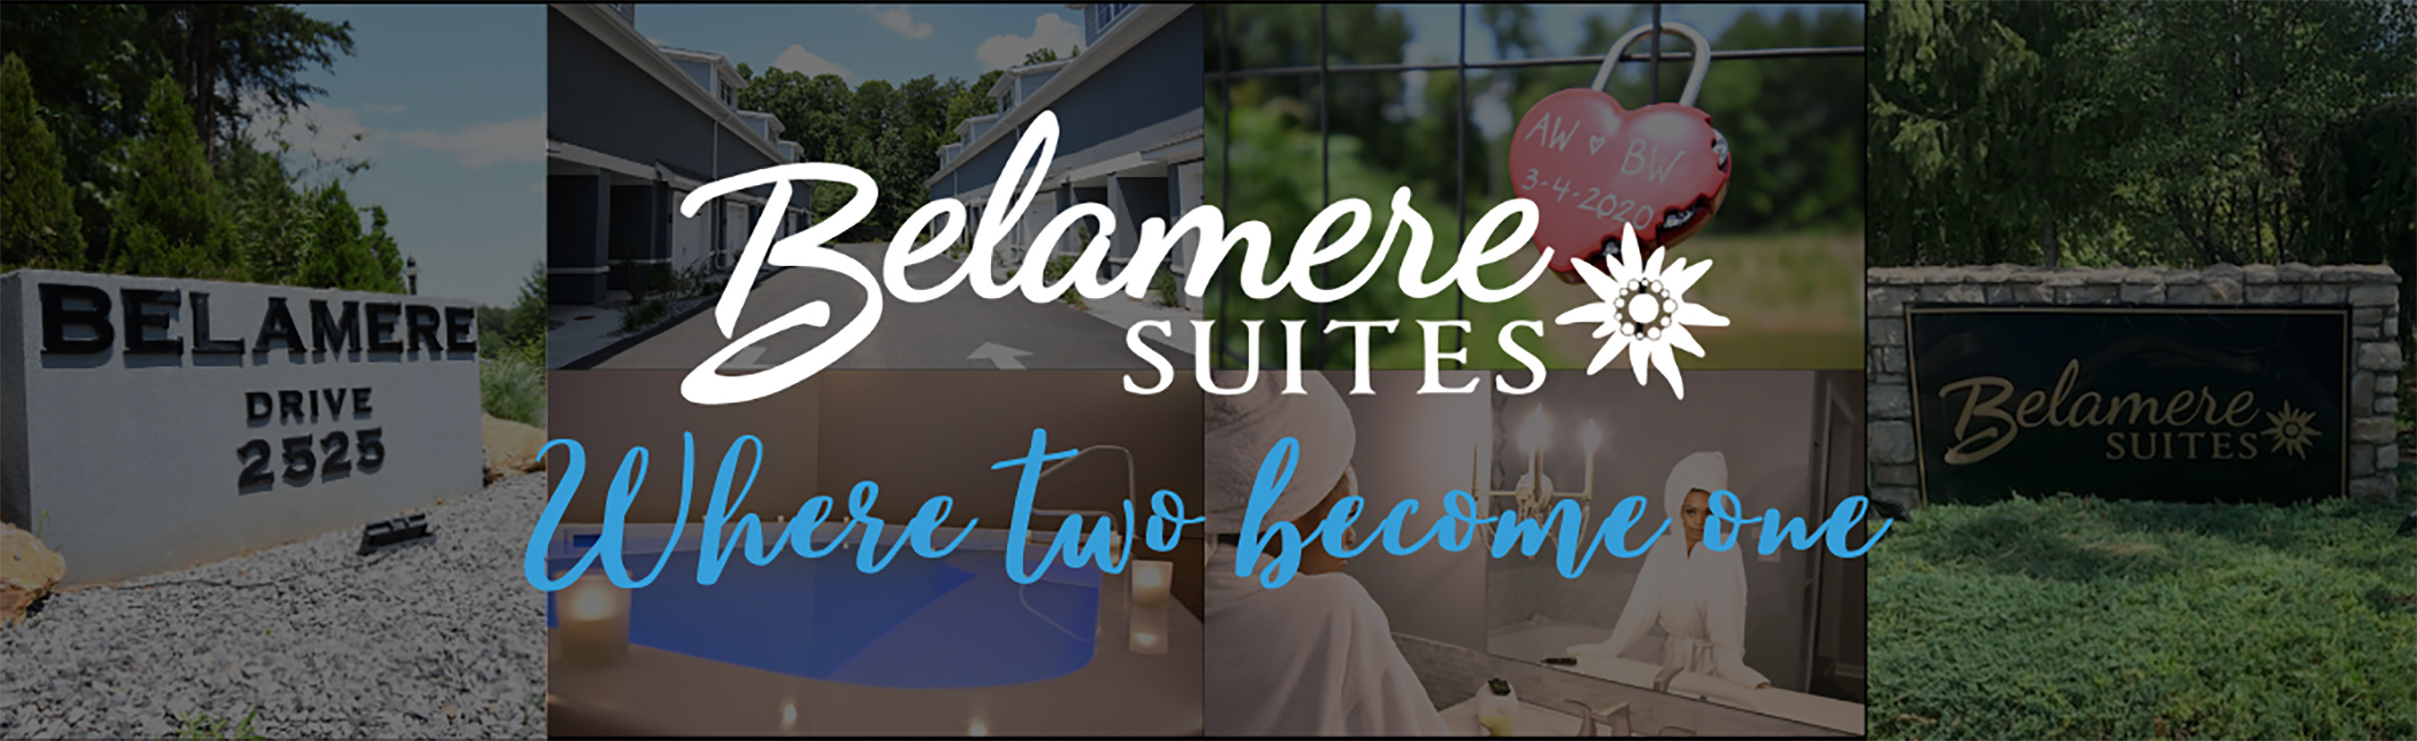 Belamere Suites Logo, Private Romantic Couples Getaway, Private Pool and Jacuzzi, Ohio and Georgia